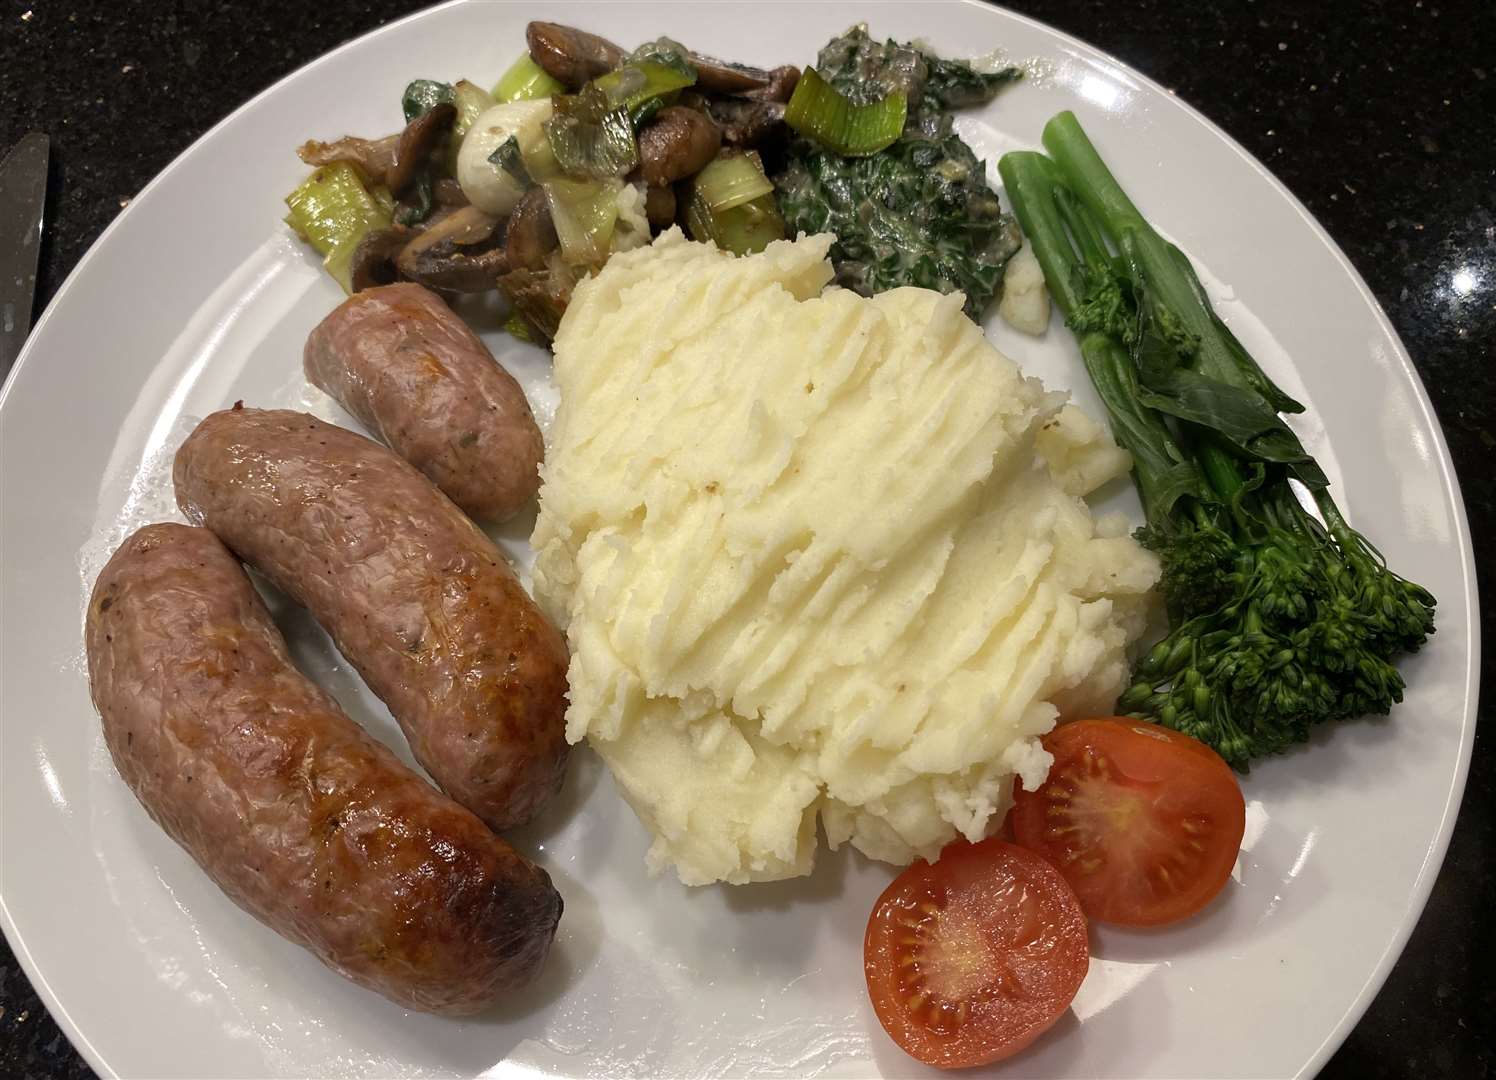 Dinner was Thanet-grown mashed potatoes and Maidstone sausages, but vegetables had to be added